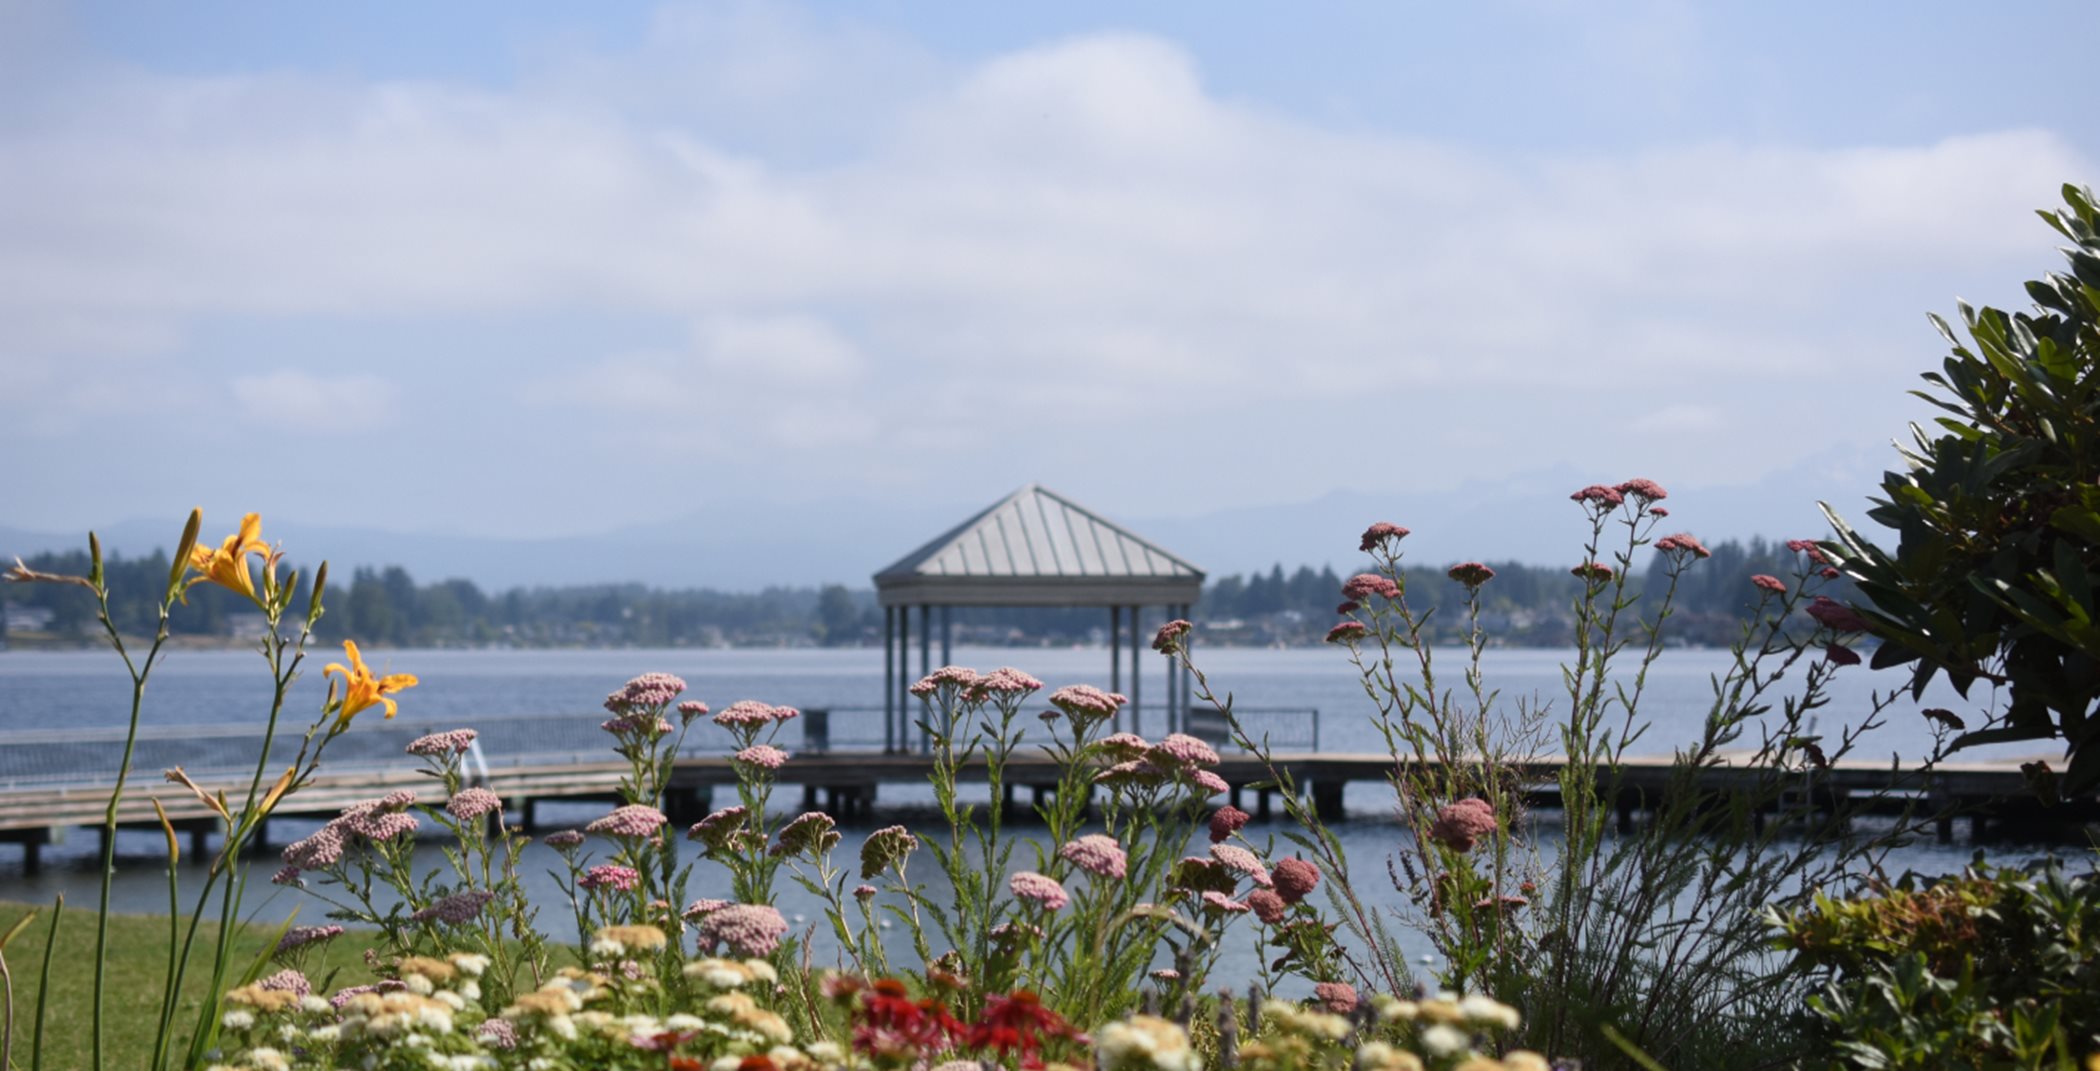 Flowers and a dock at Lake Stevens Park